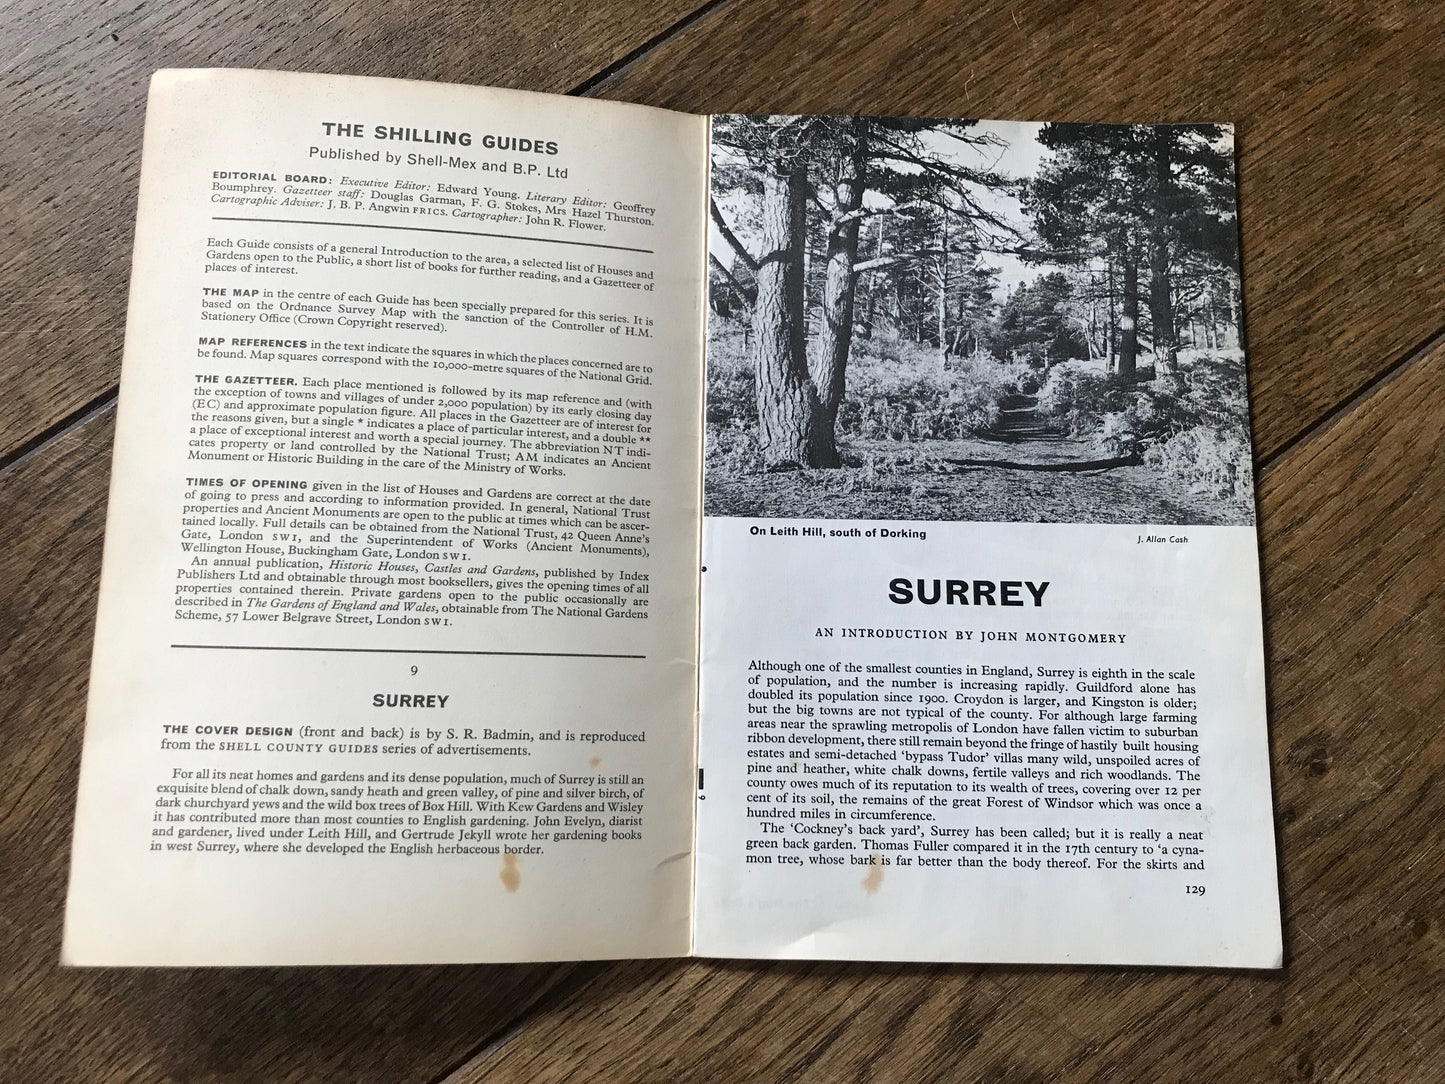 The Shilling Guide to Surrey